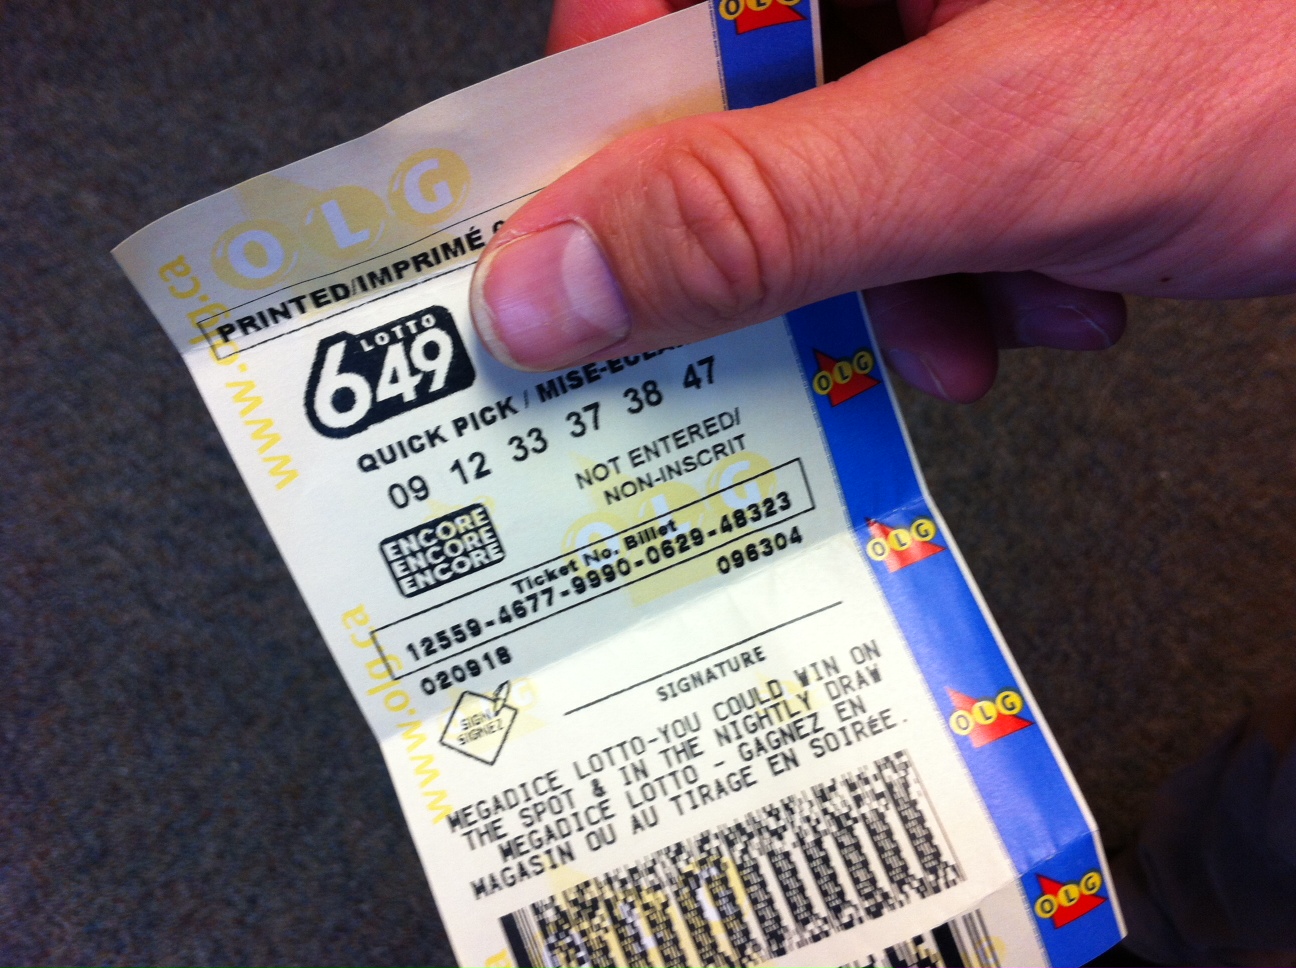 Lotto 649 And Bc49